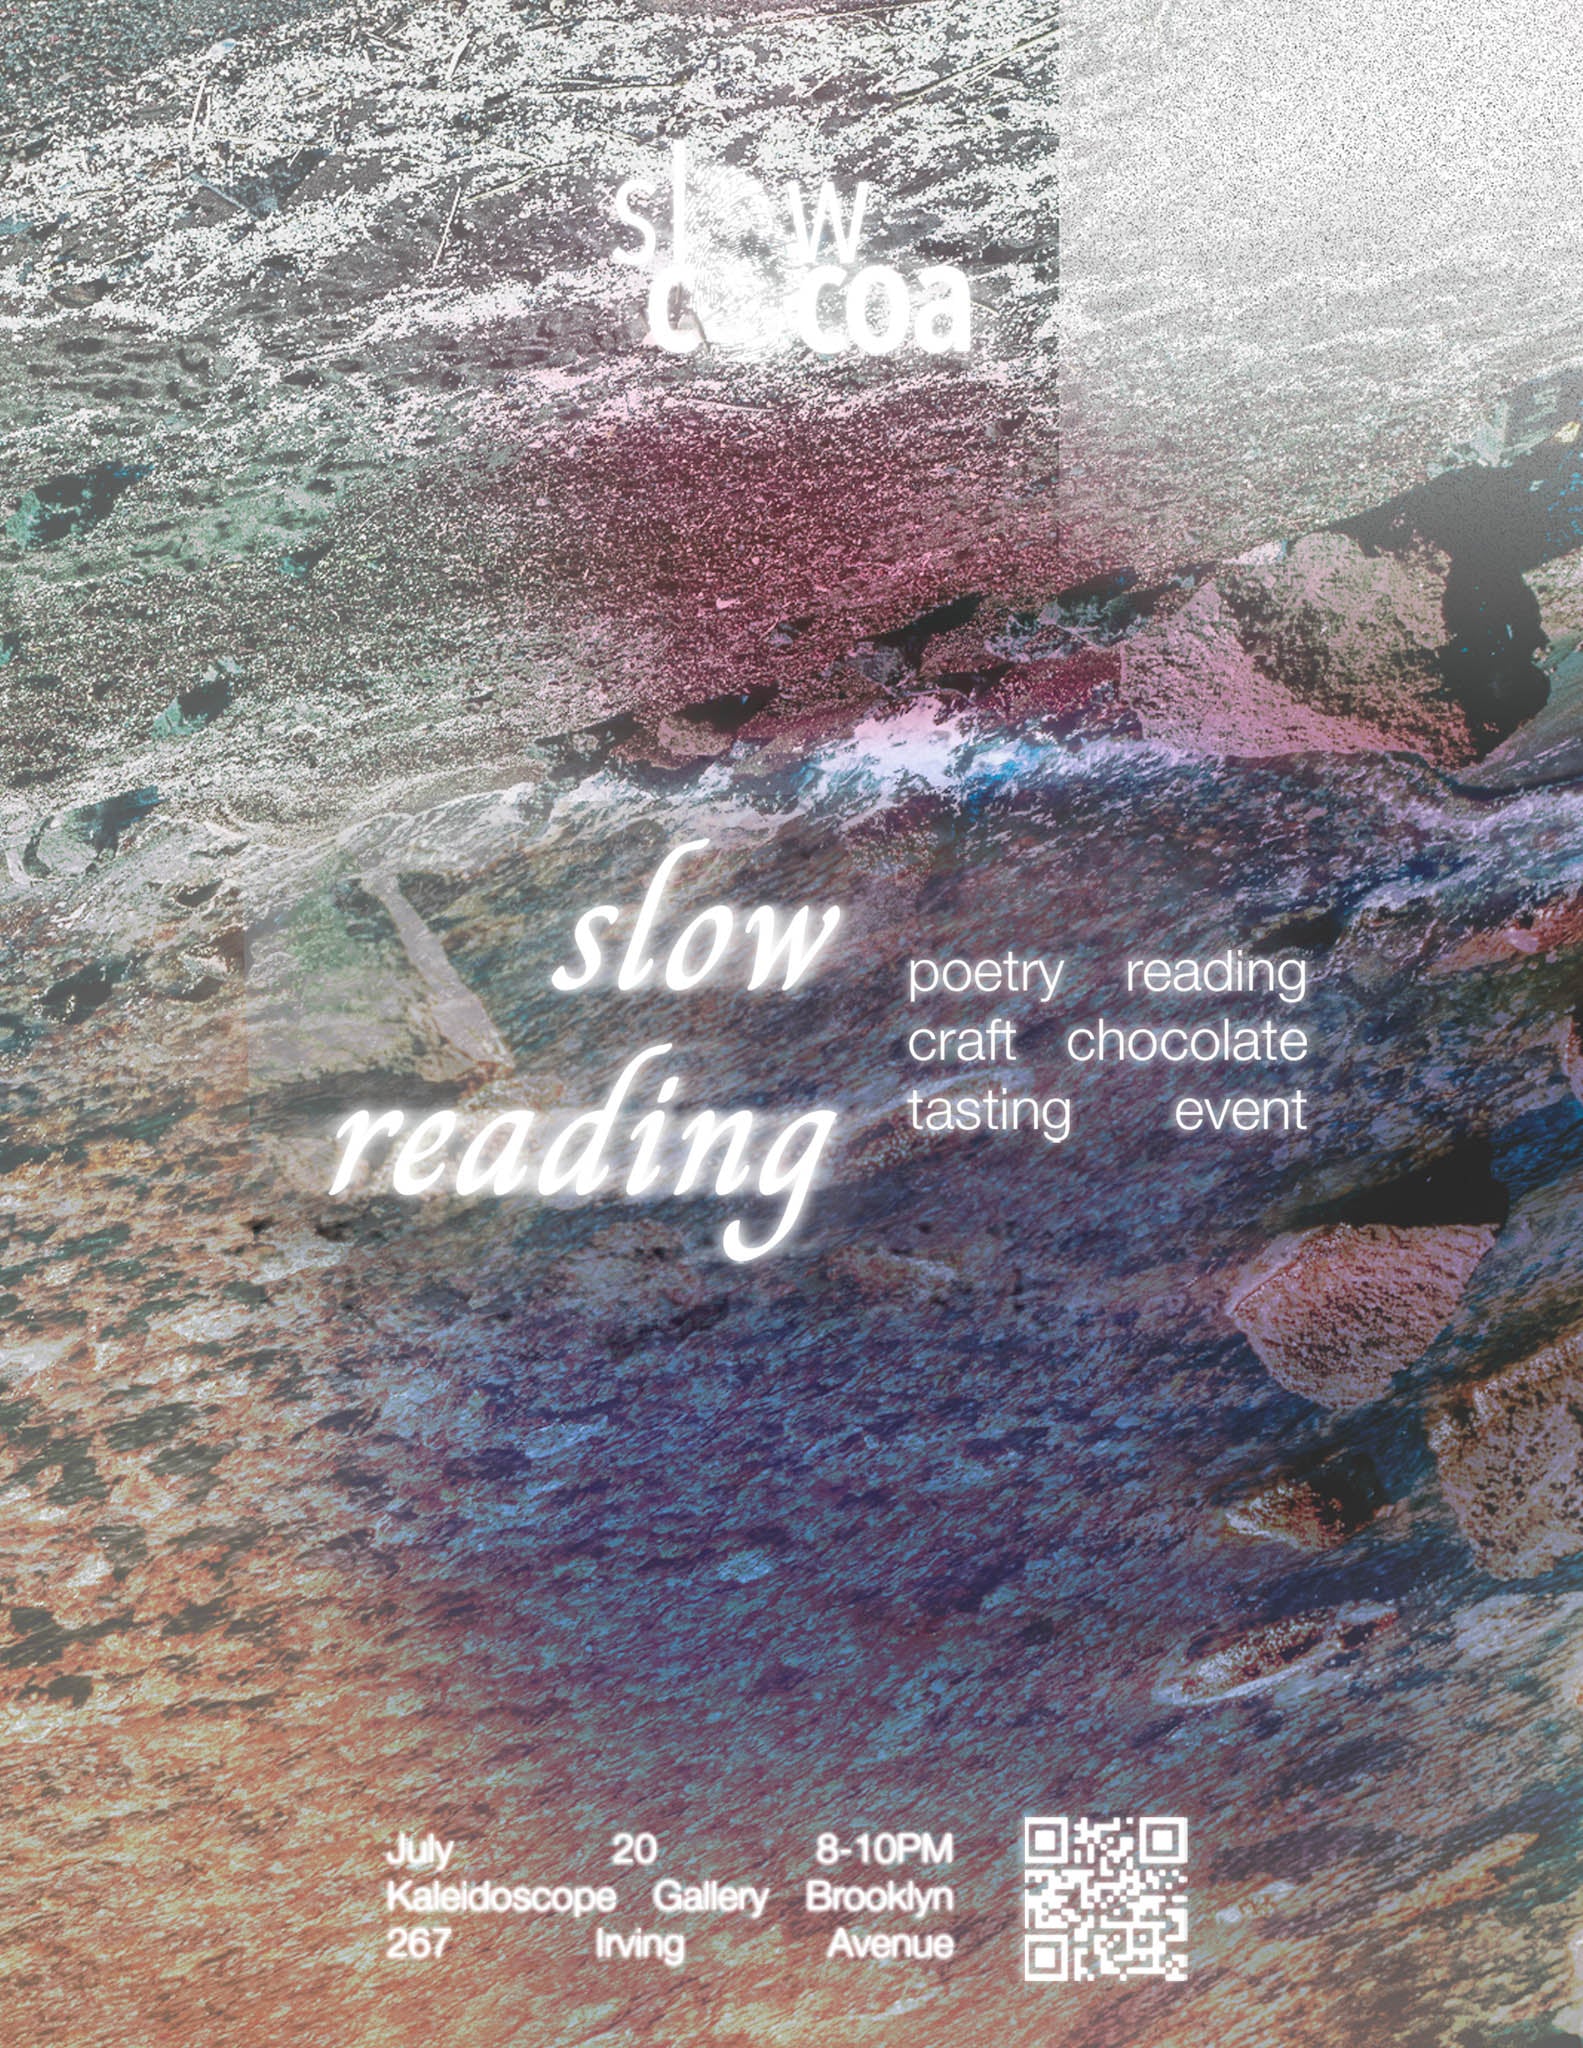 slowcocoa SLOWreading poetry reading event flyer